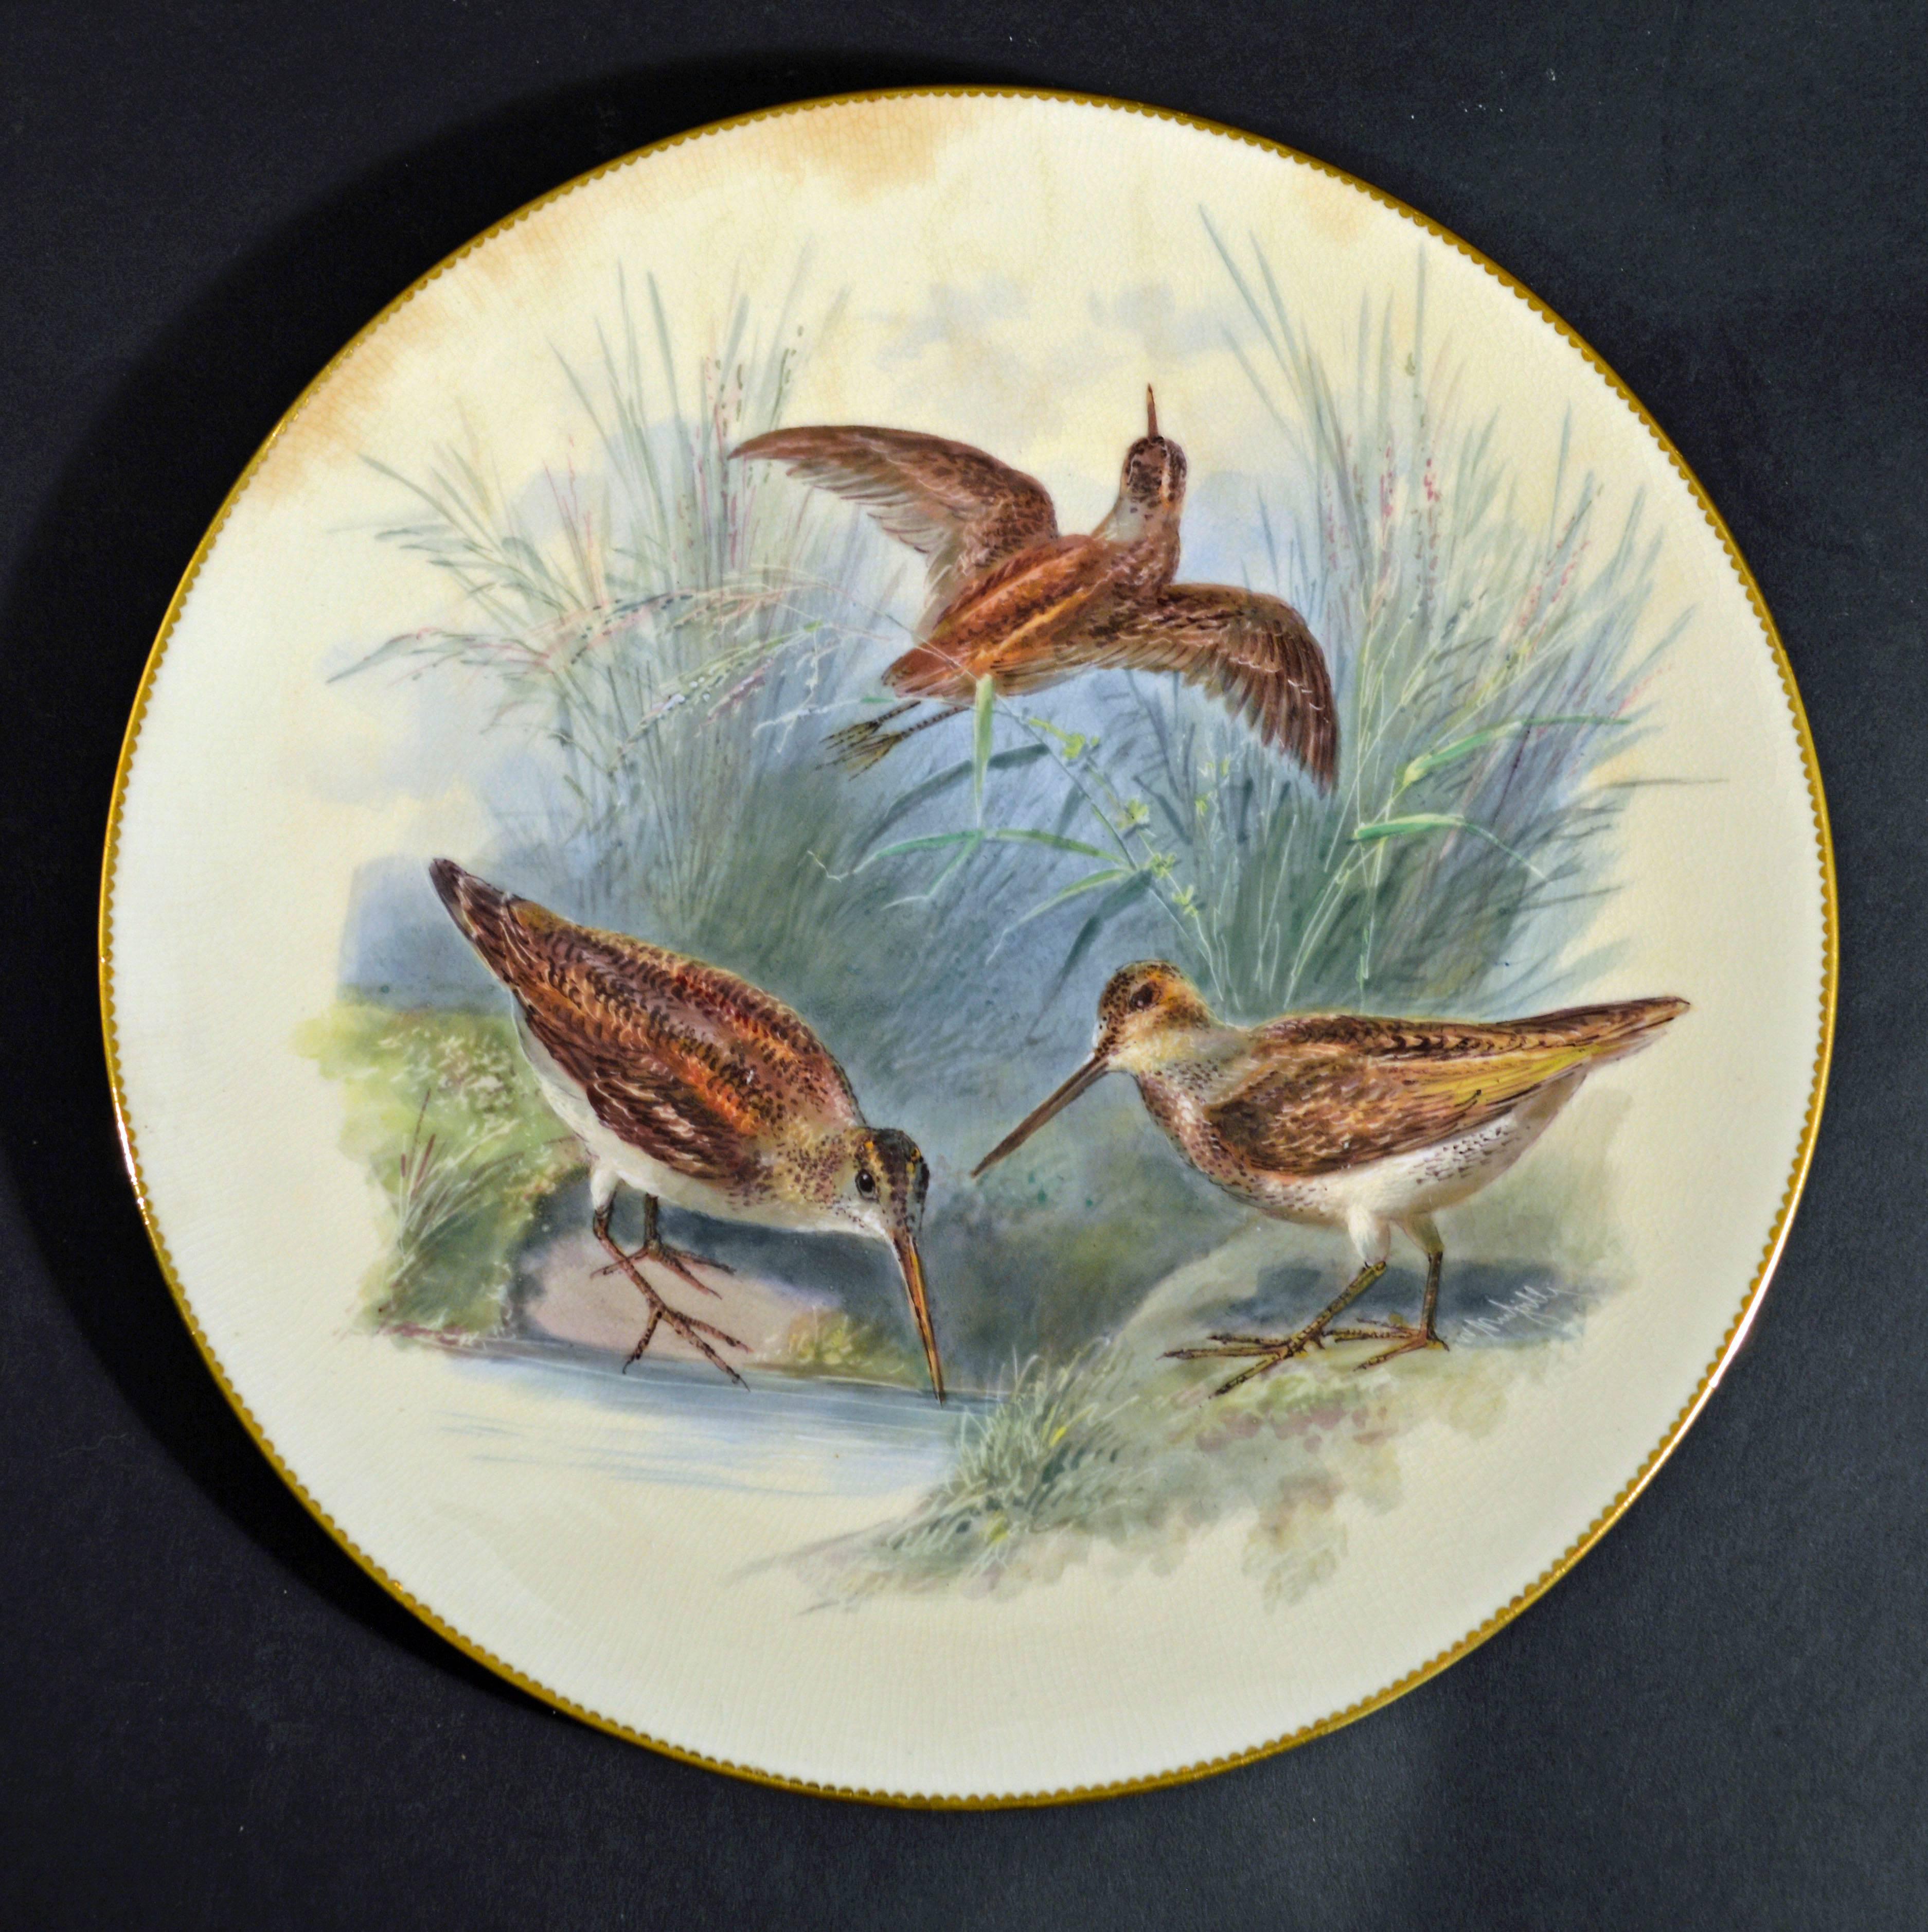 19th Century Thomas Minton Porcelain Bird Cabinet Plates, Signed by William Mussil.